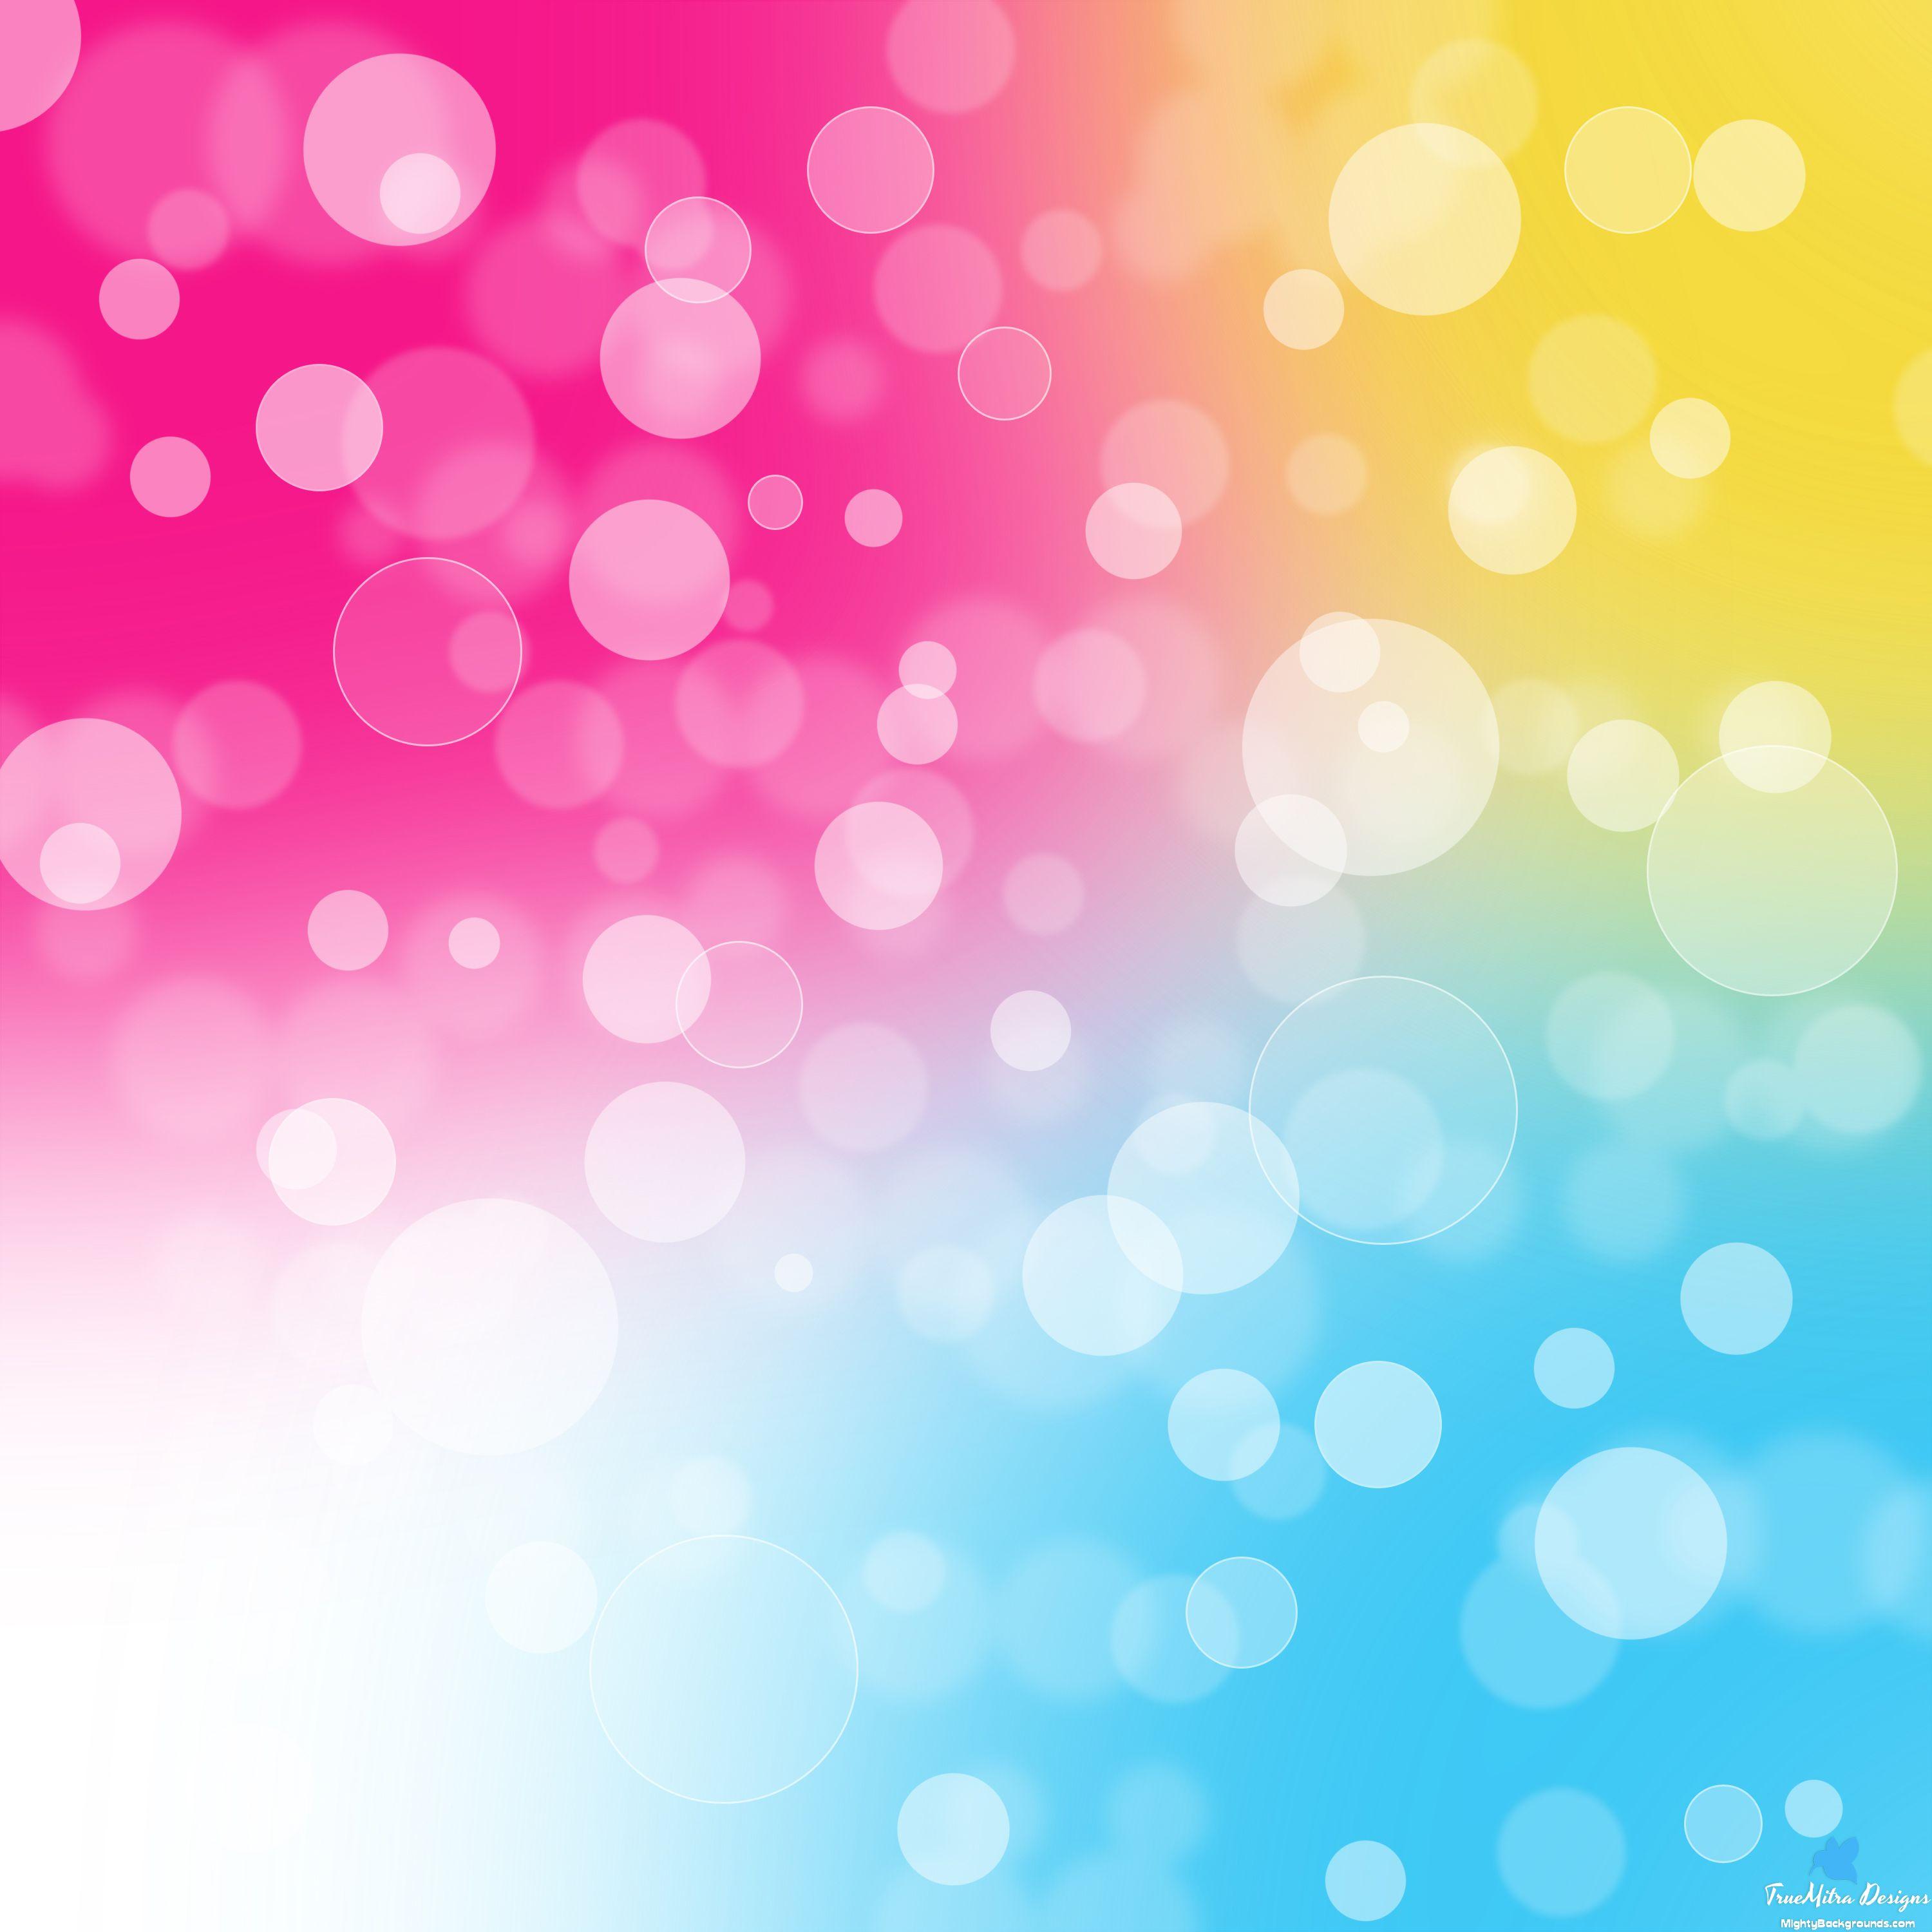 Colorful Background. Extra. Background Image, Wallpaper